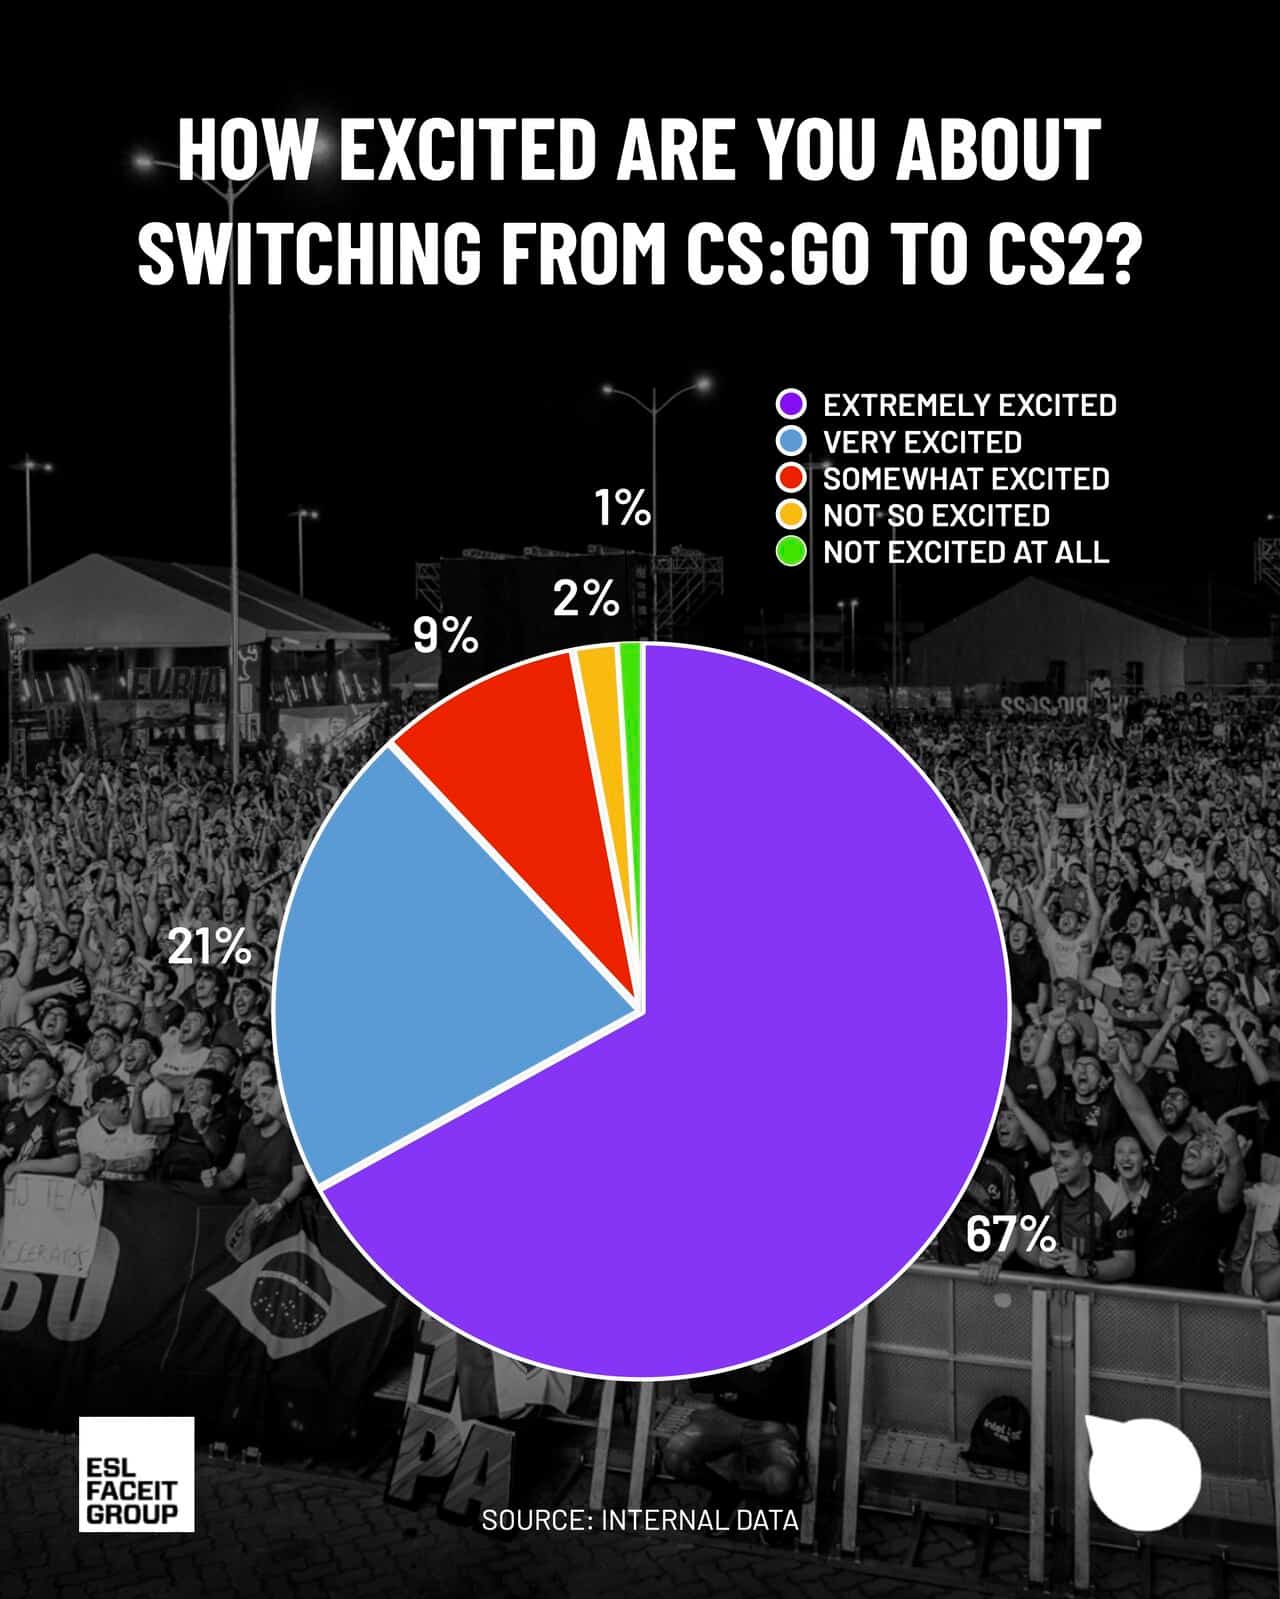 Infographic showing how excited Counter-Strike: Global Offensive players are to switch to the new Counter-Strike 2 (CS2).